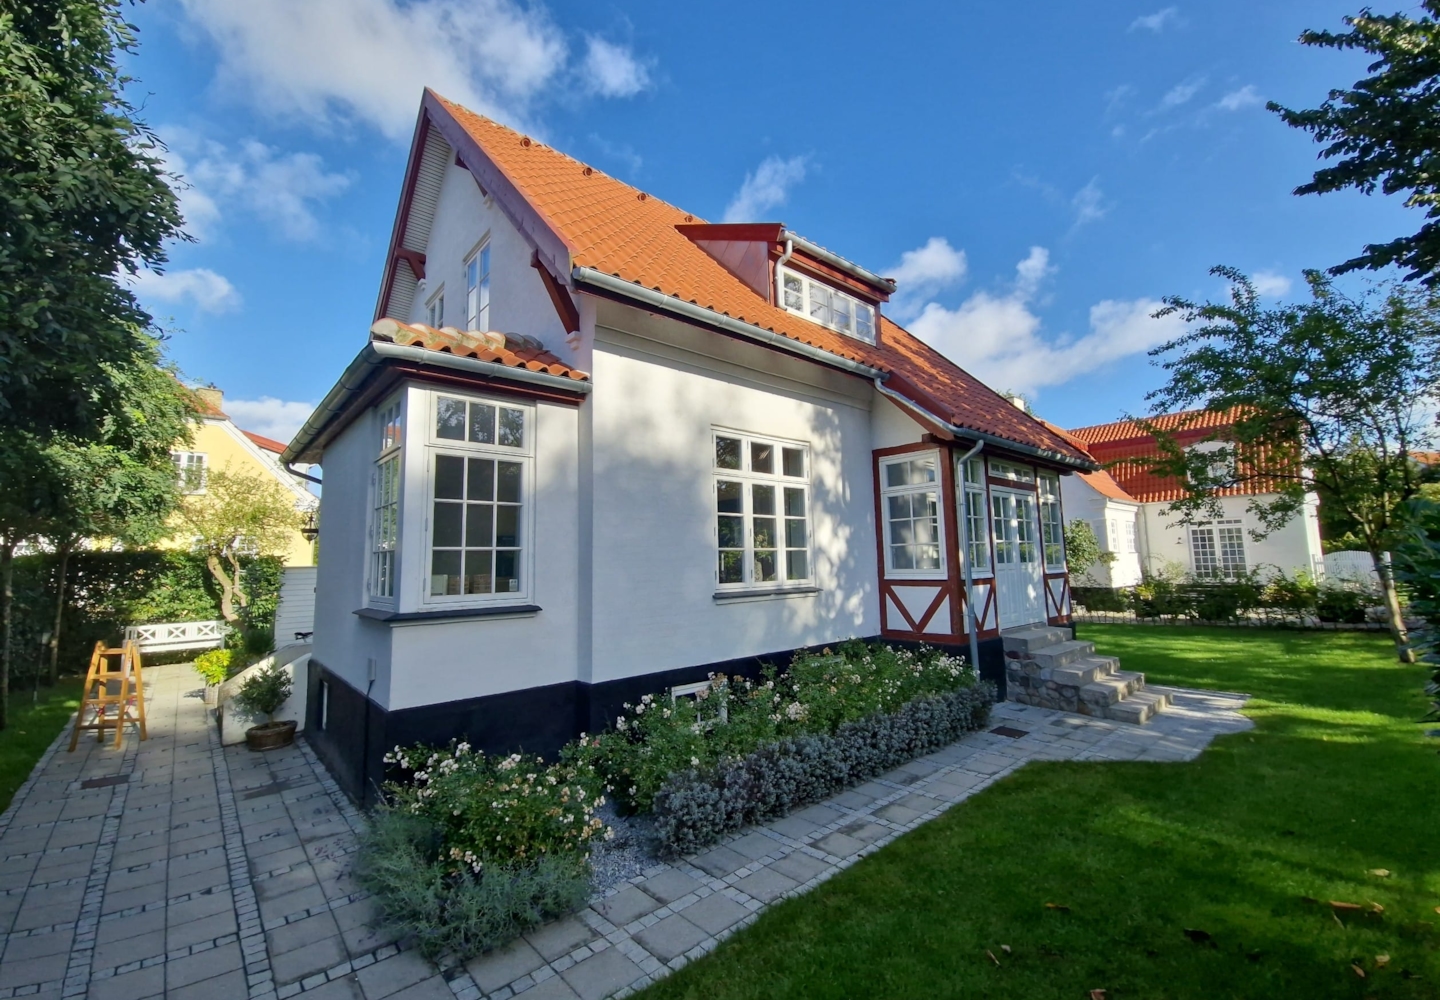 Helenevej 4, 2960 Rungsted Kyst